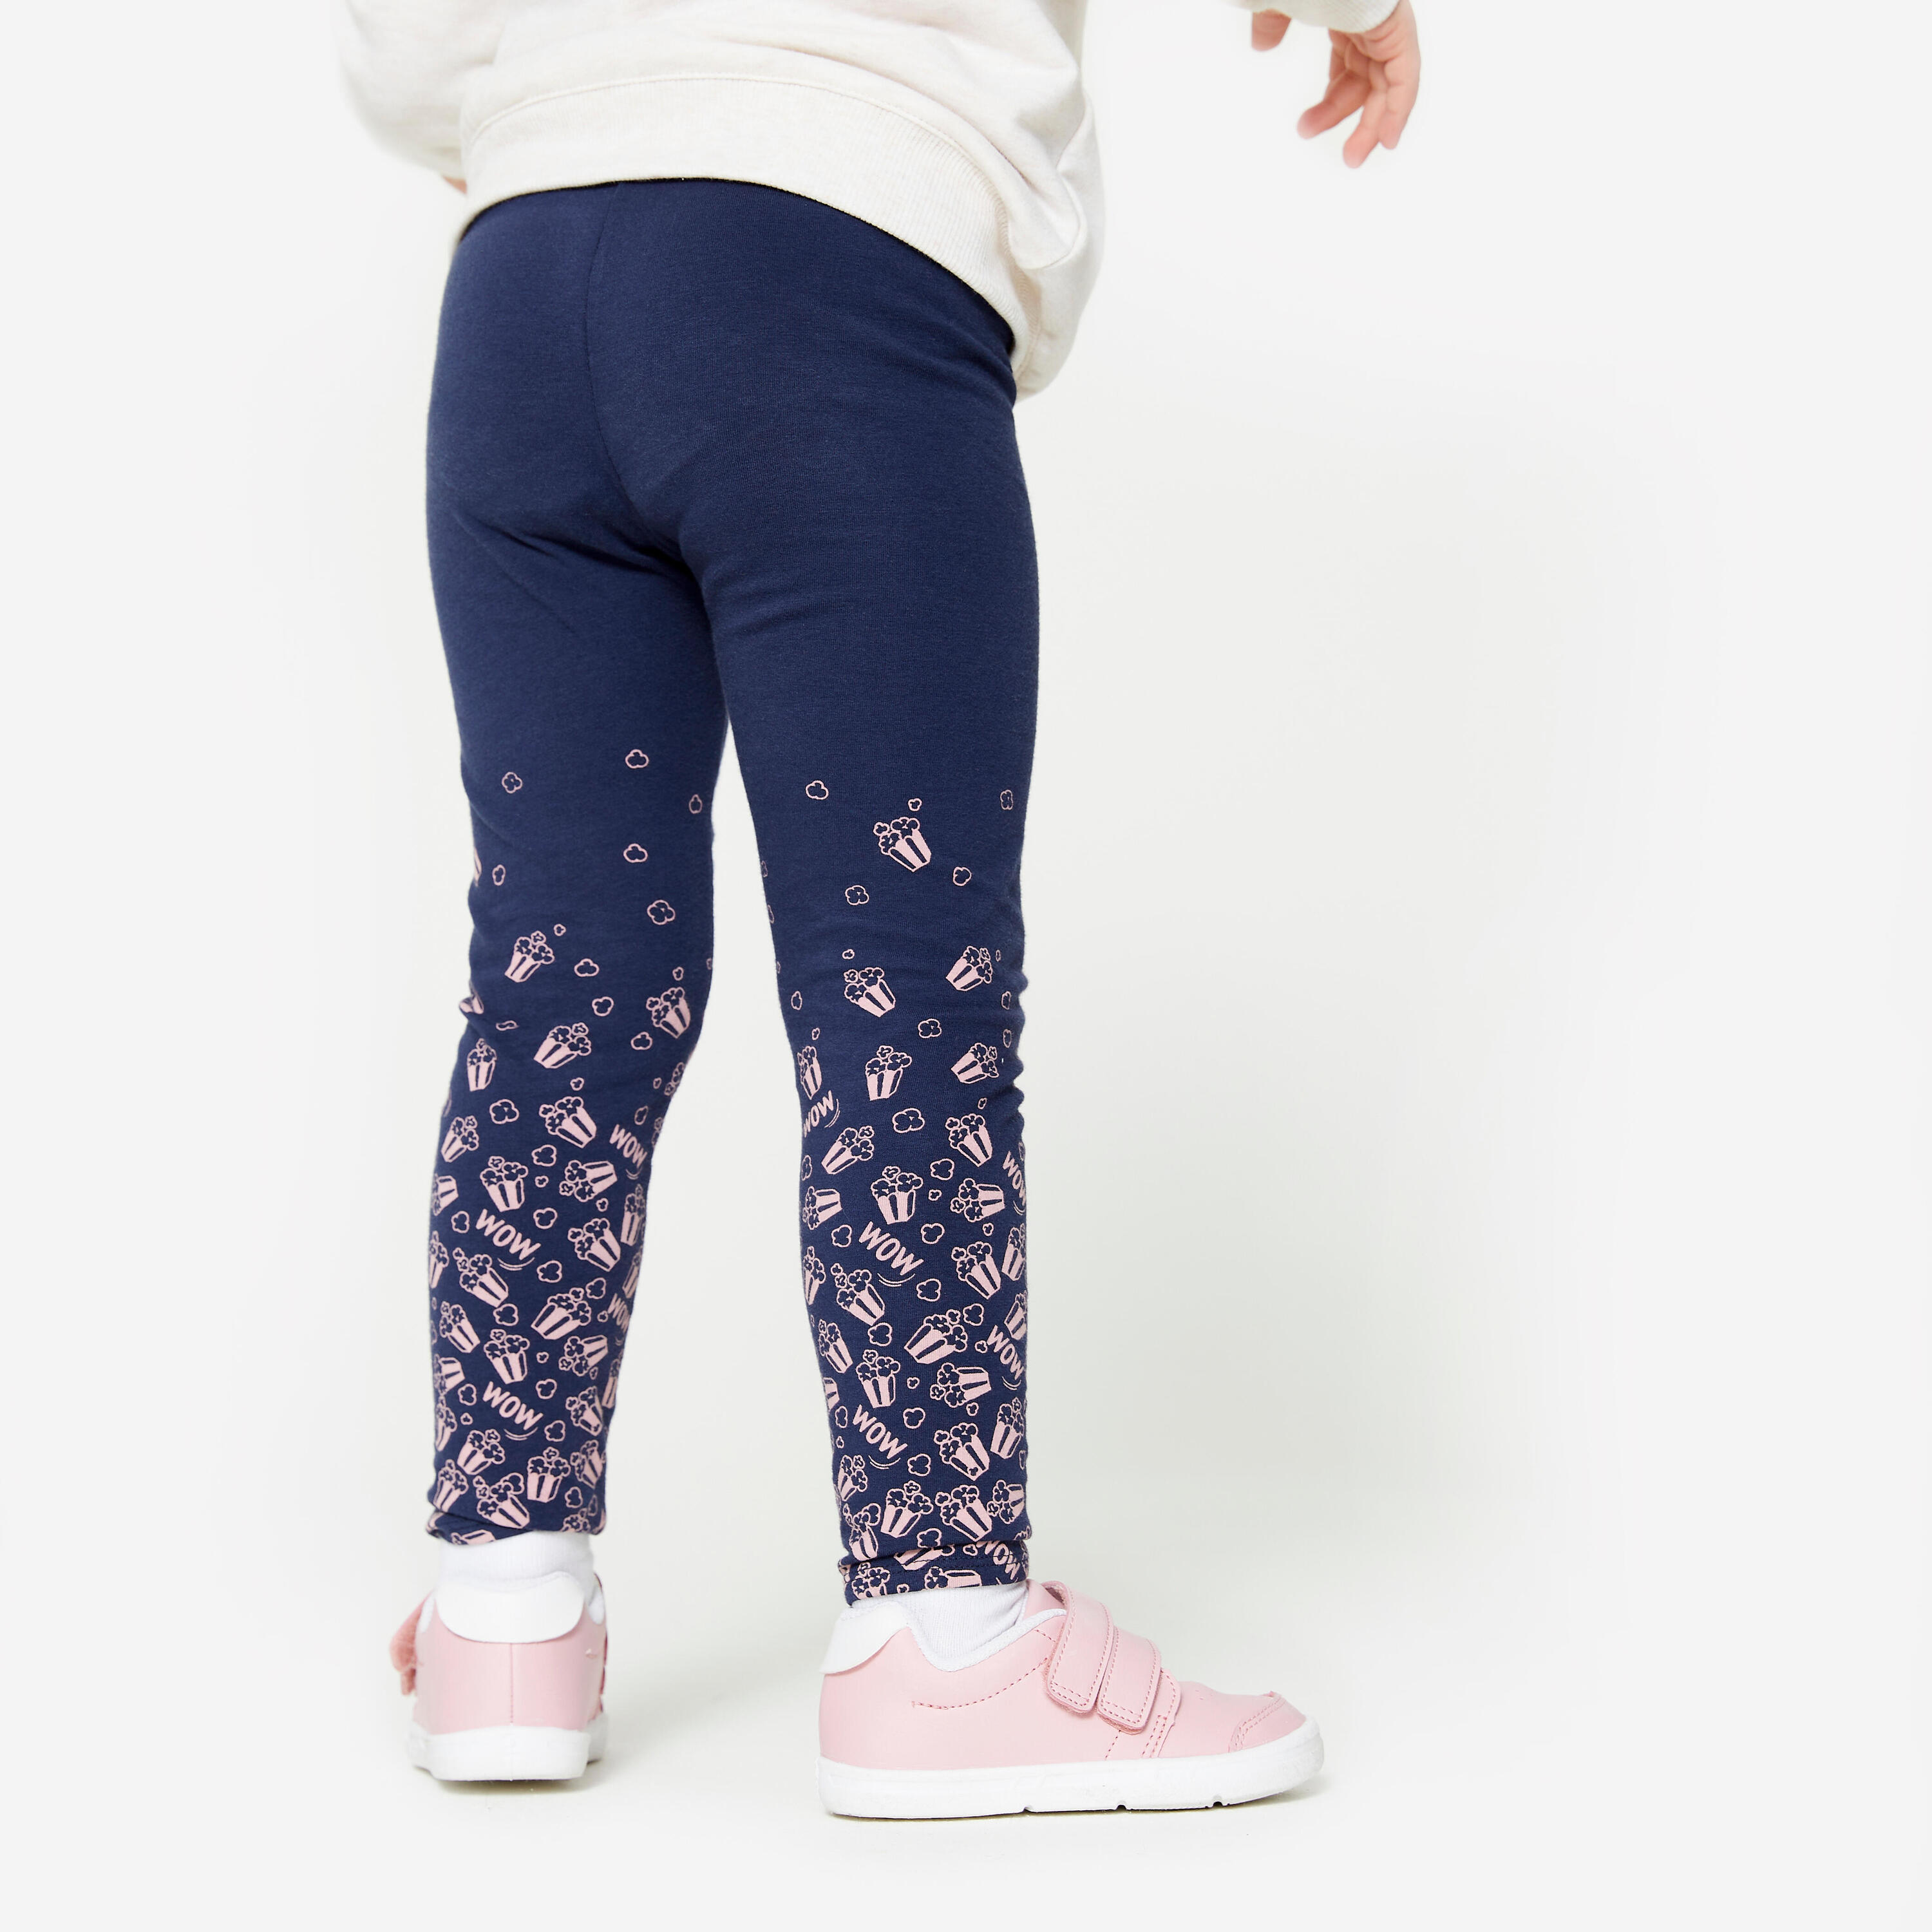 Baby Basic Cotton Leggings - Blue/Pink with Patterns 4/4